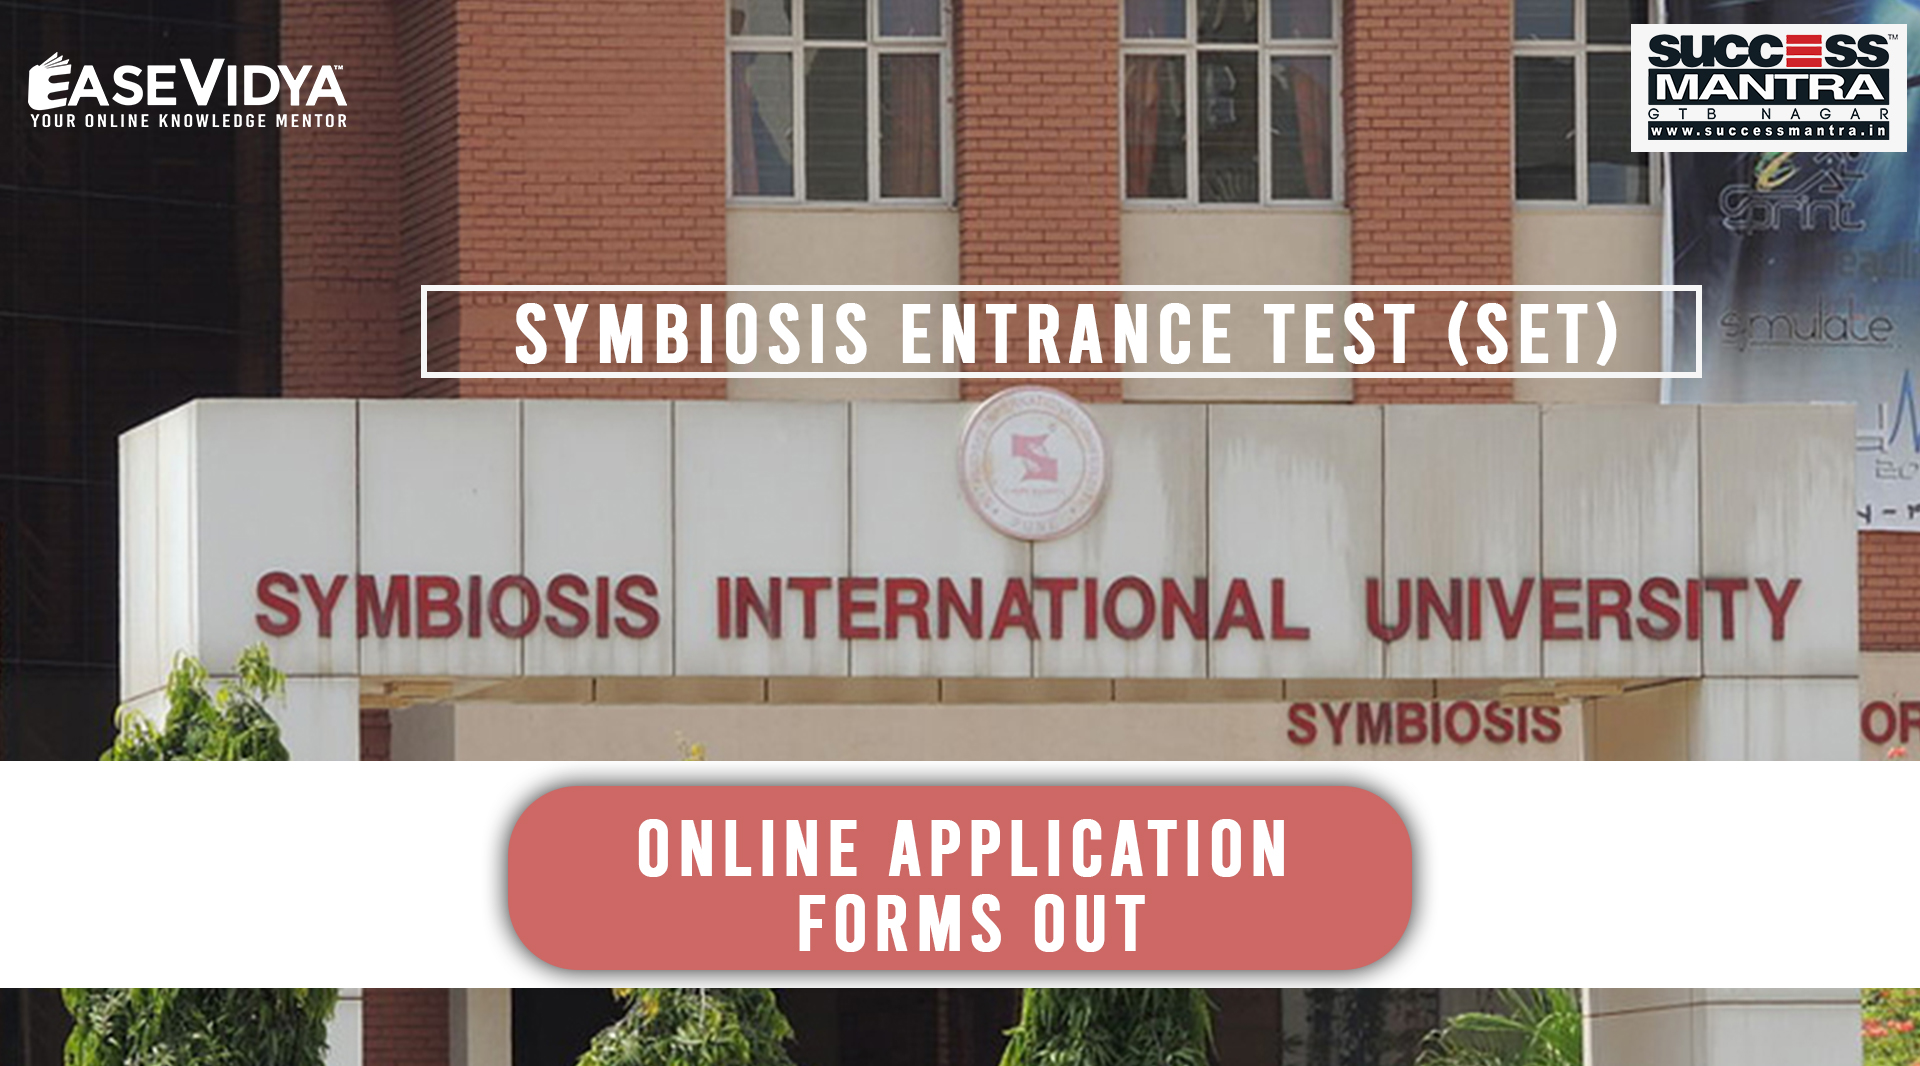 Symbiosis Entrance Test (Set) Application Forms Out And Applicable For BBA, BBA IT, BCA, B SC In Culinary Arts, BA In Media N Communication, symbiosis law school pune, symbiosis law school Noida, symbiosis law school Hyderabad, symbiosis law school Nagpur, www.set-test.org 2020 , set ishinfo, slat symbiosis, symbiosis 2020, symbiosis college Pune admission 2020, symbiosis admission, siteee 2020, success mantra coaching institute for management courses like BBA, BBA IT, BCA, B.SC. HOTEL MANAGEMENT, LAW, LLB, BA LLB, LLB INTEGRATED COURSE